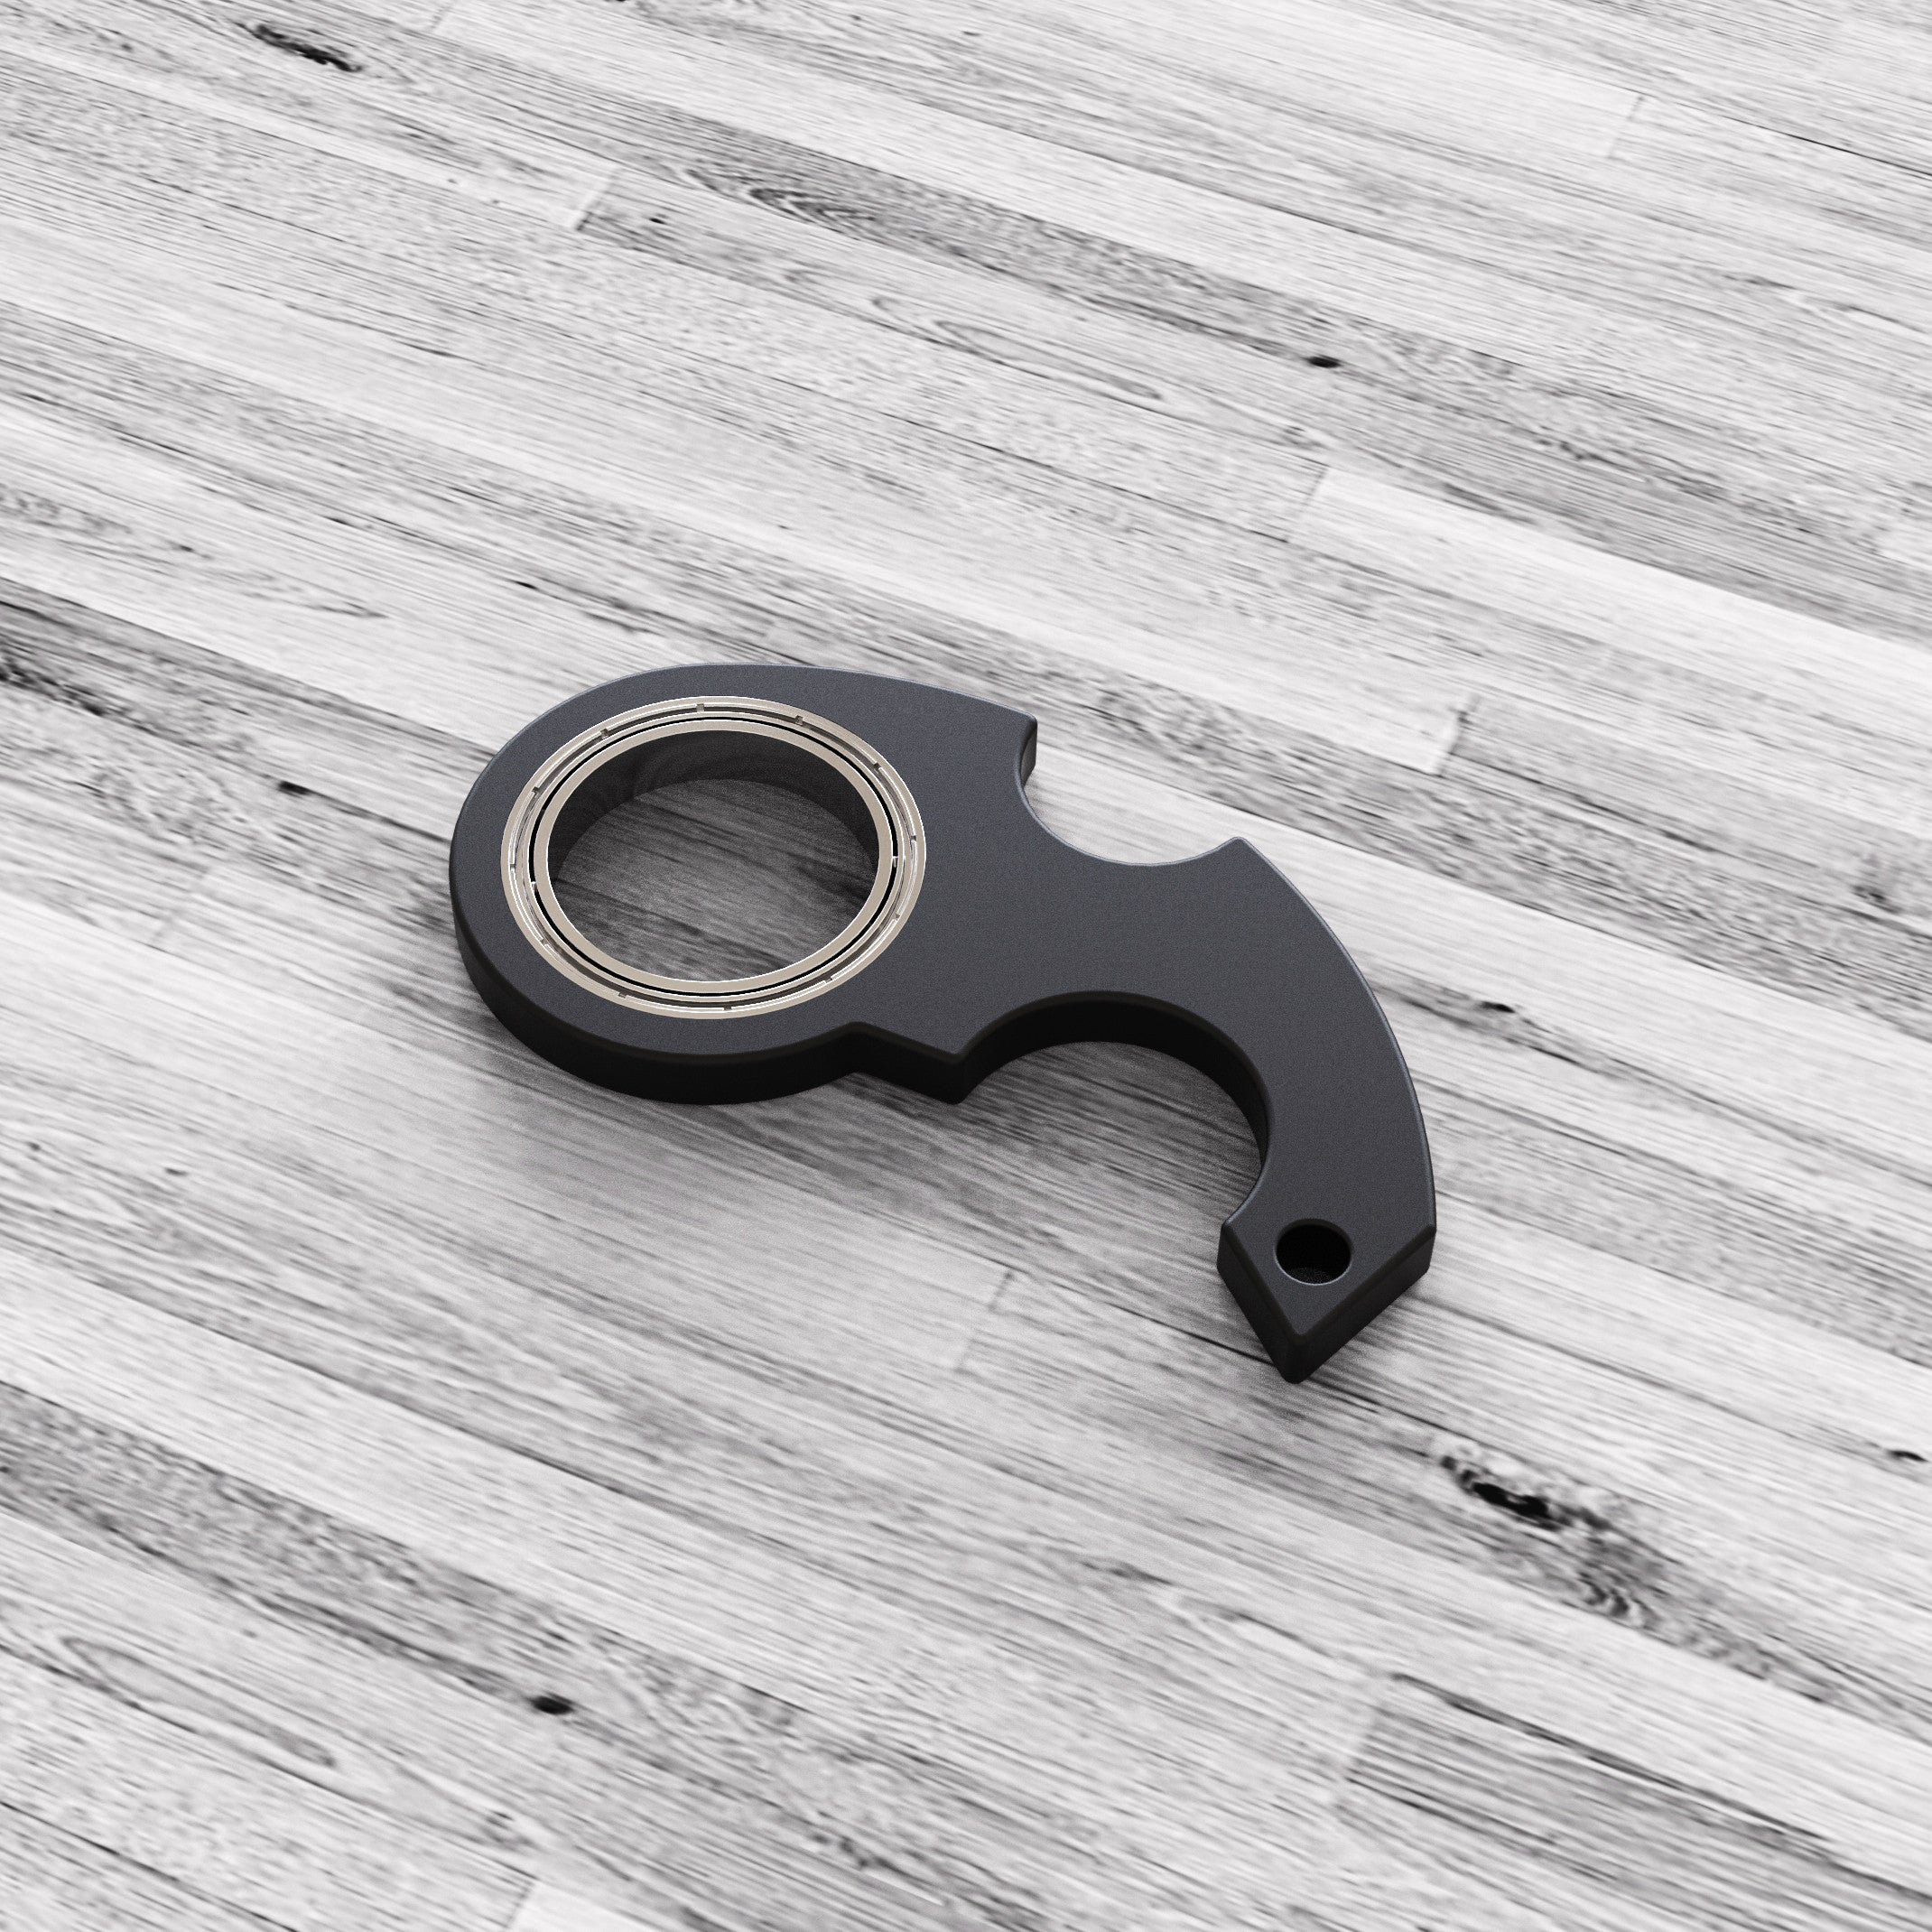 Creative Fidget Spinner Toy Keychain: Hand spinner as anti-stress toy for stress reduction, finger spinner keychain with bottle opener, children's toy.